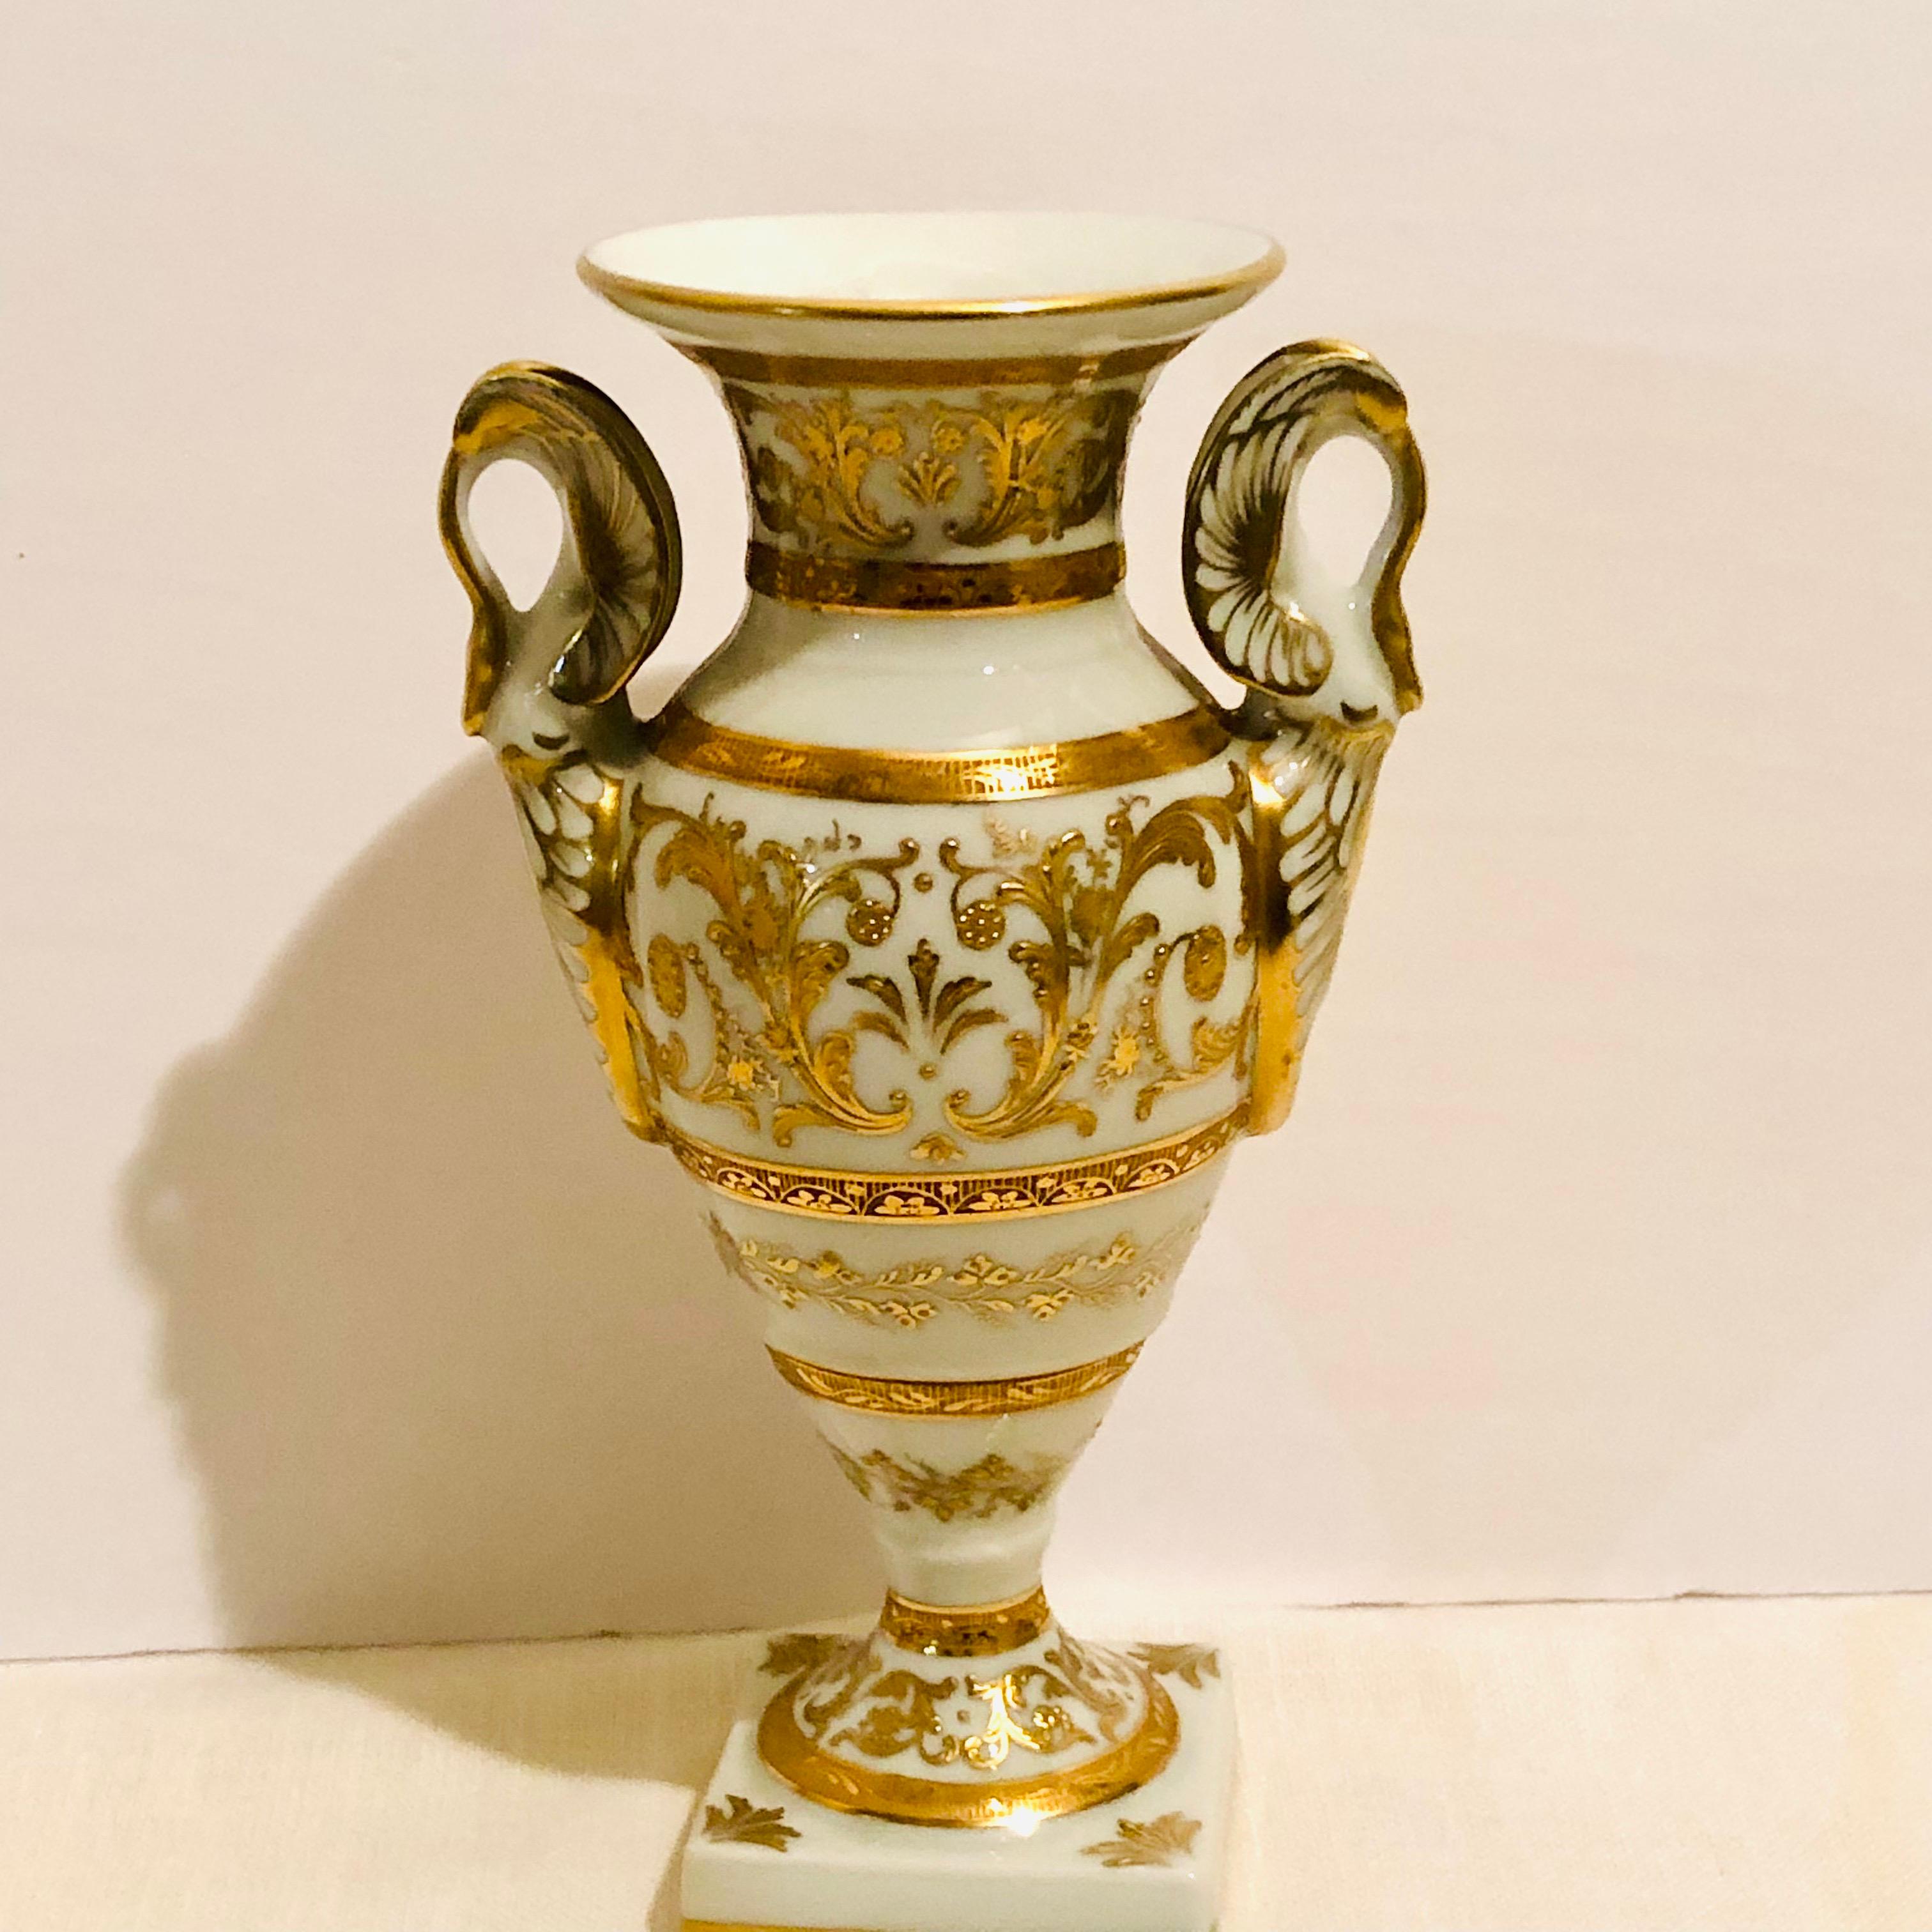 Le Tallec Neoclassical Vase With Elaborate Raised Gliding and Swan Handles 1